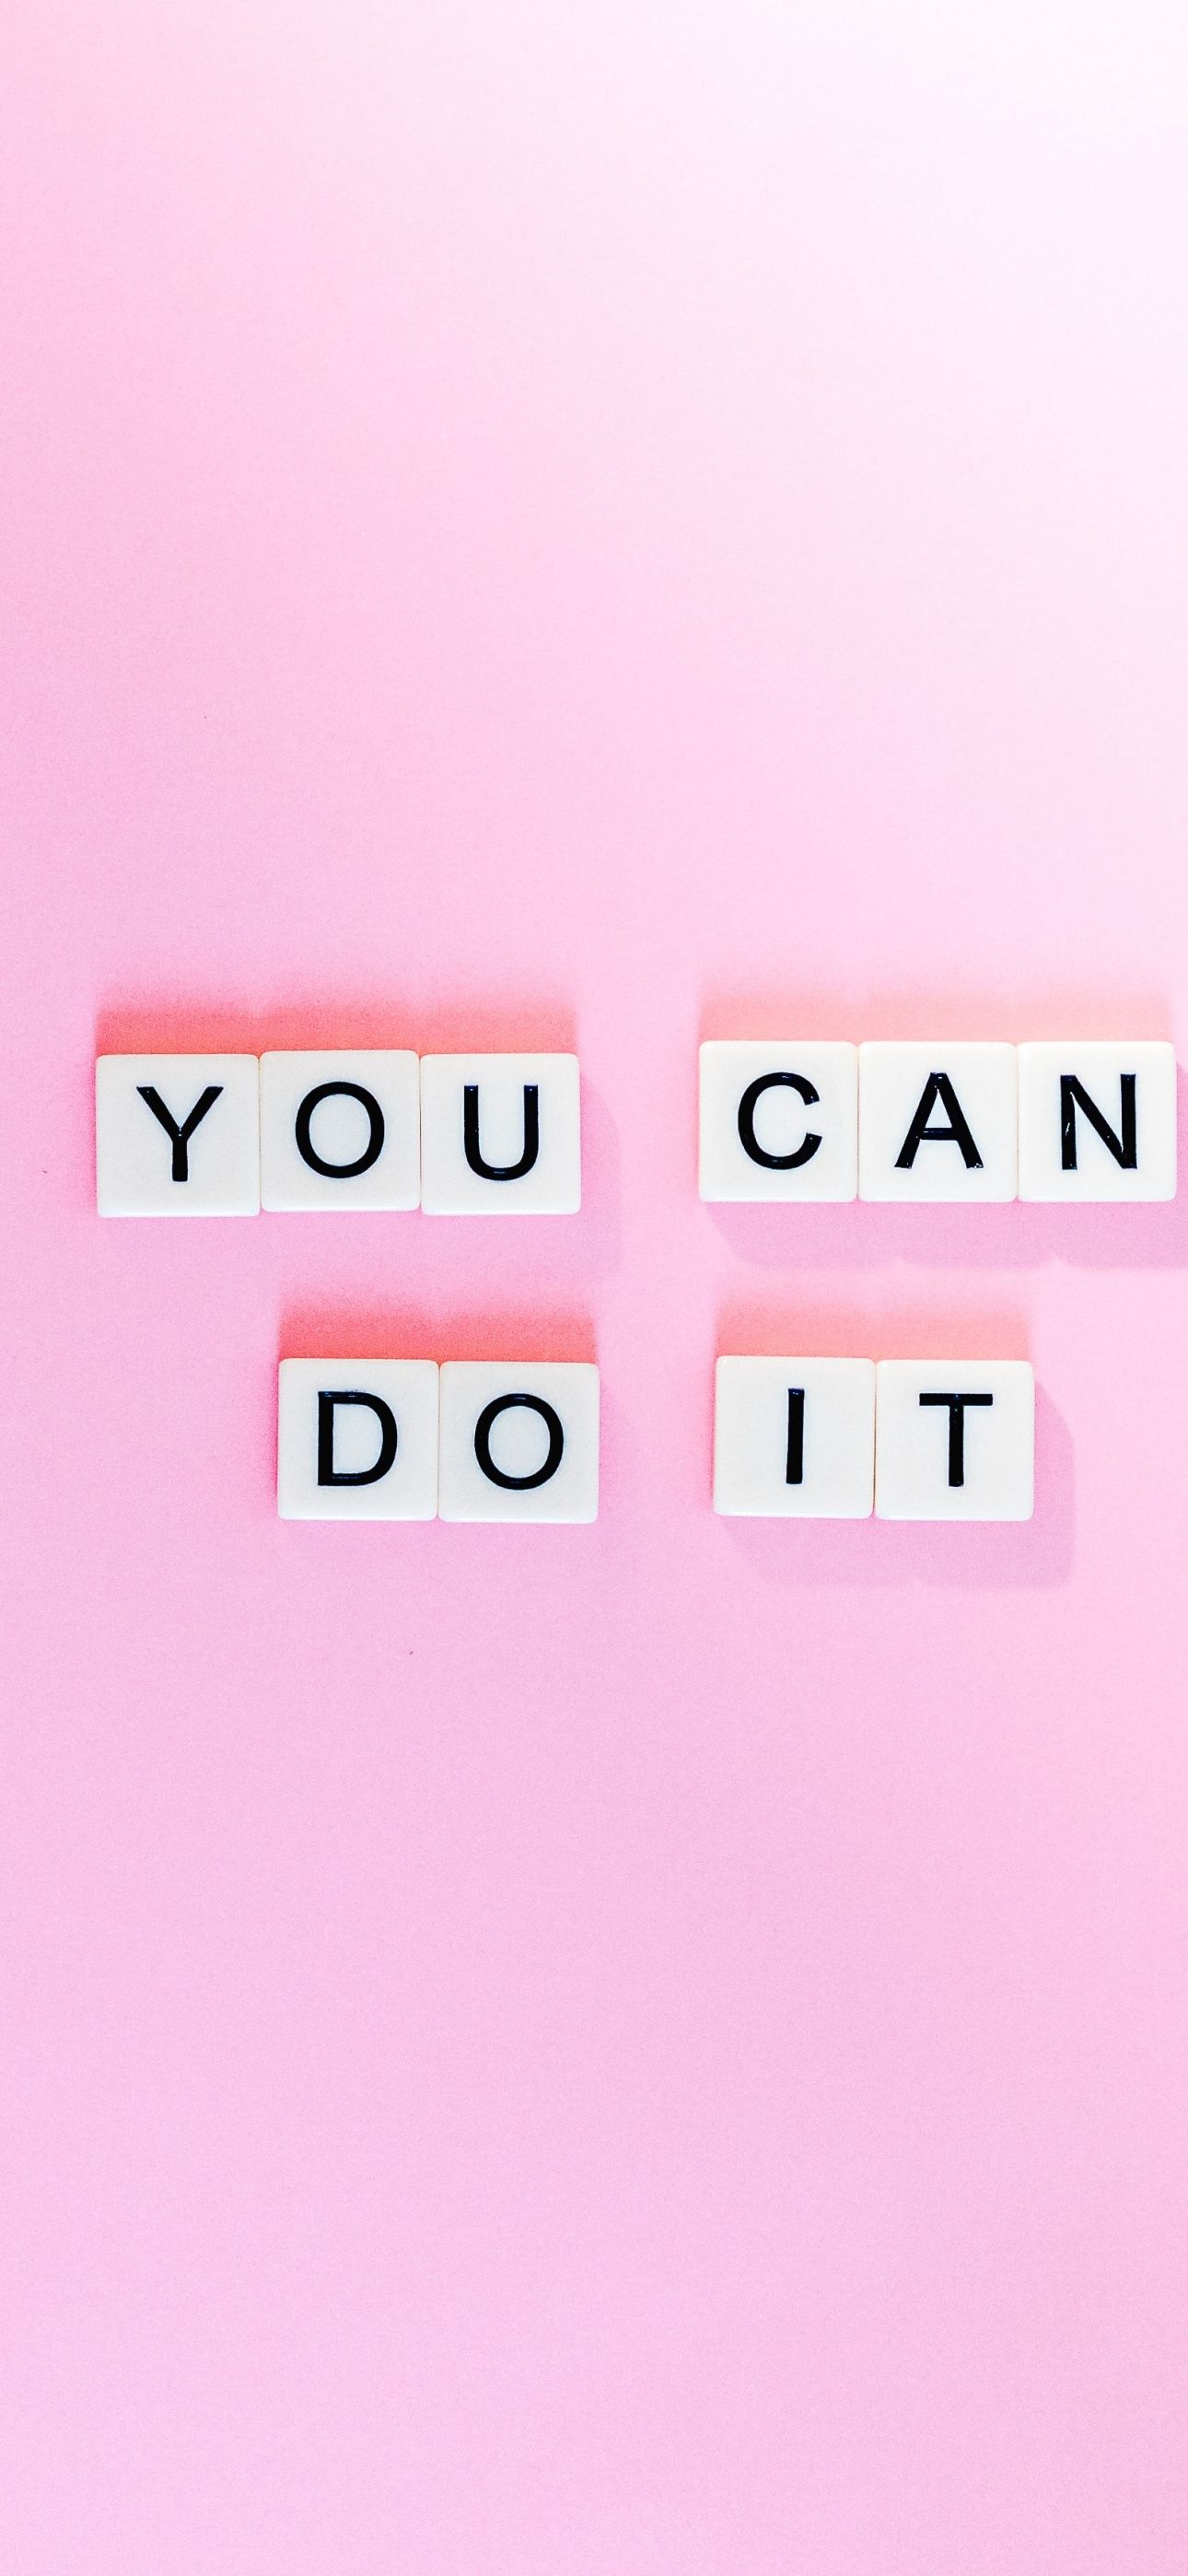 You Can Do It Wallpaper 4K, Pink background